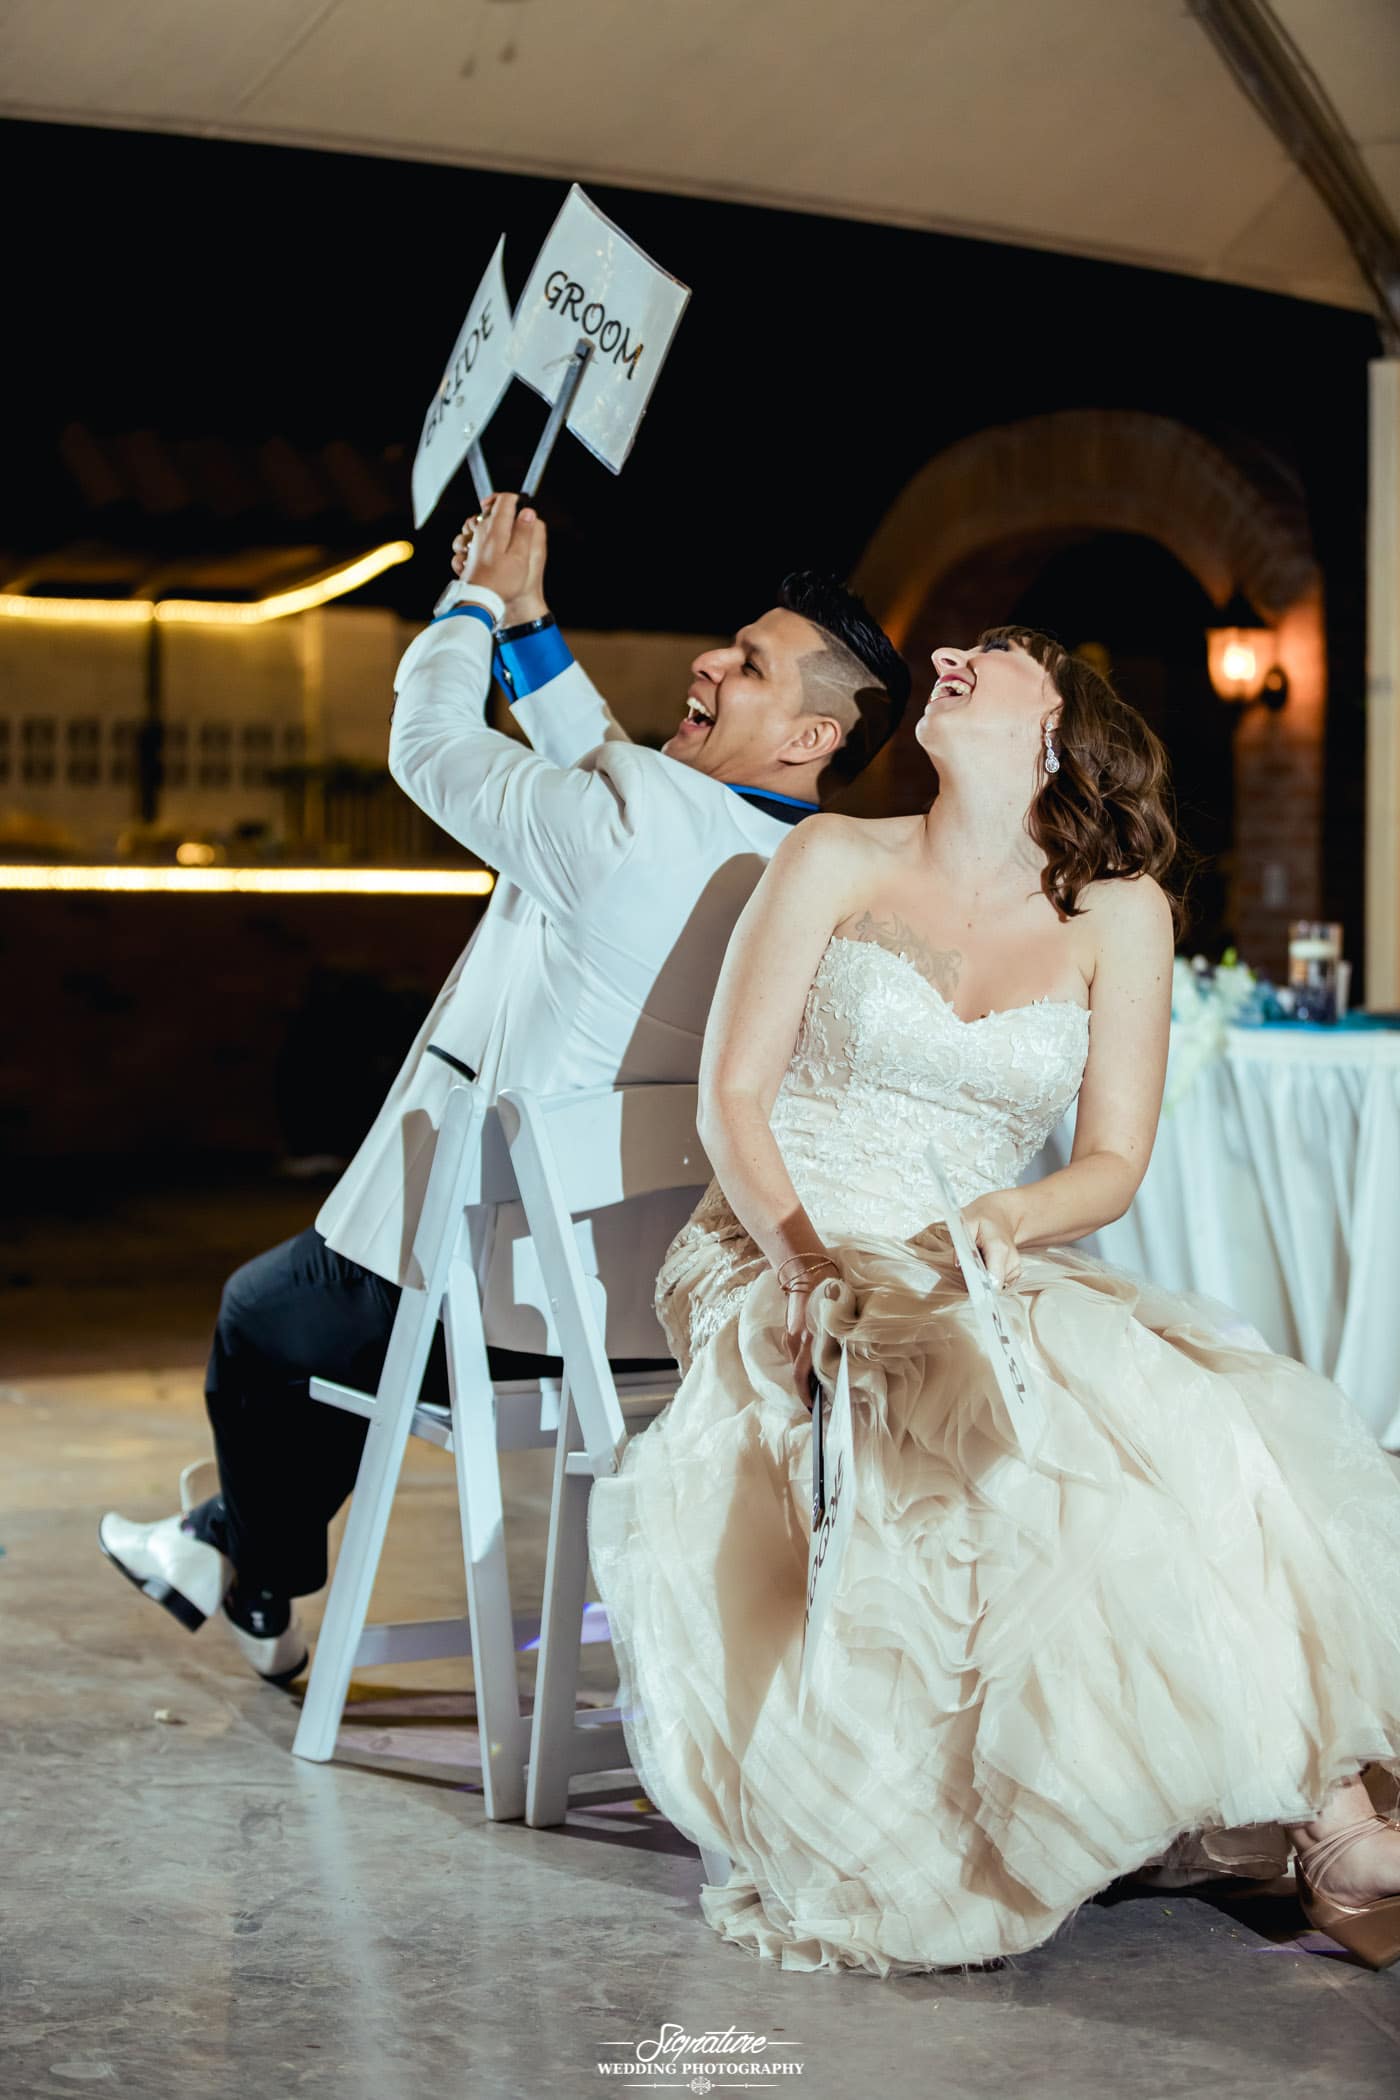 Bride and groom back to back on chairs for wedding game